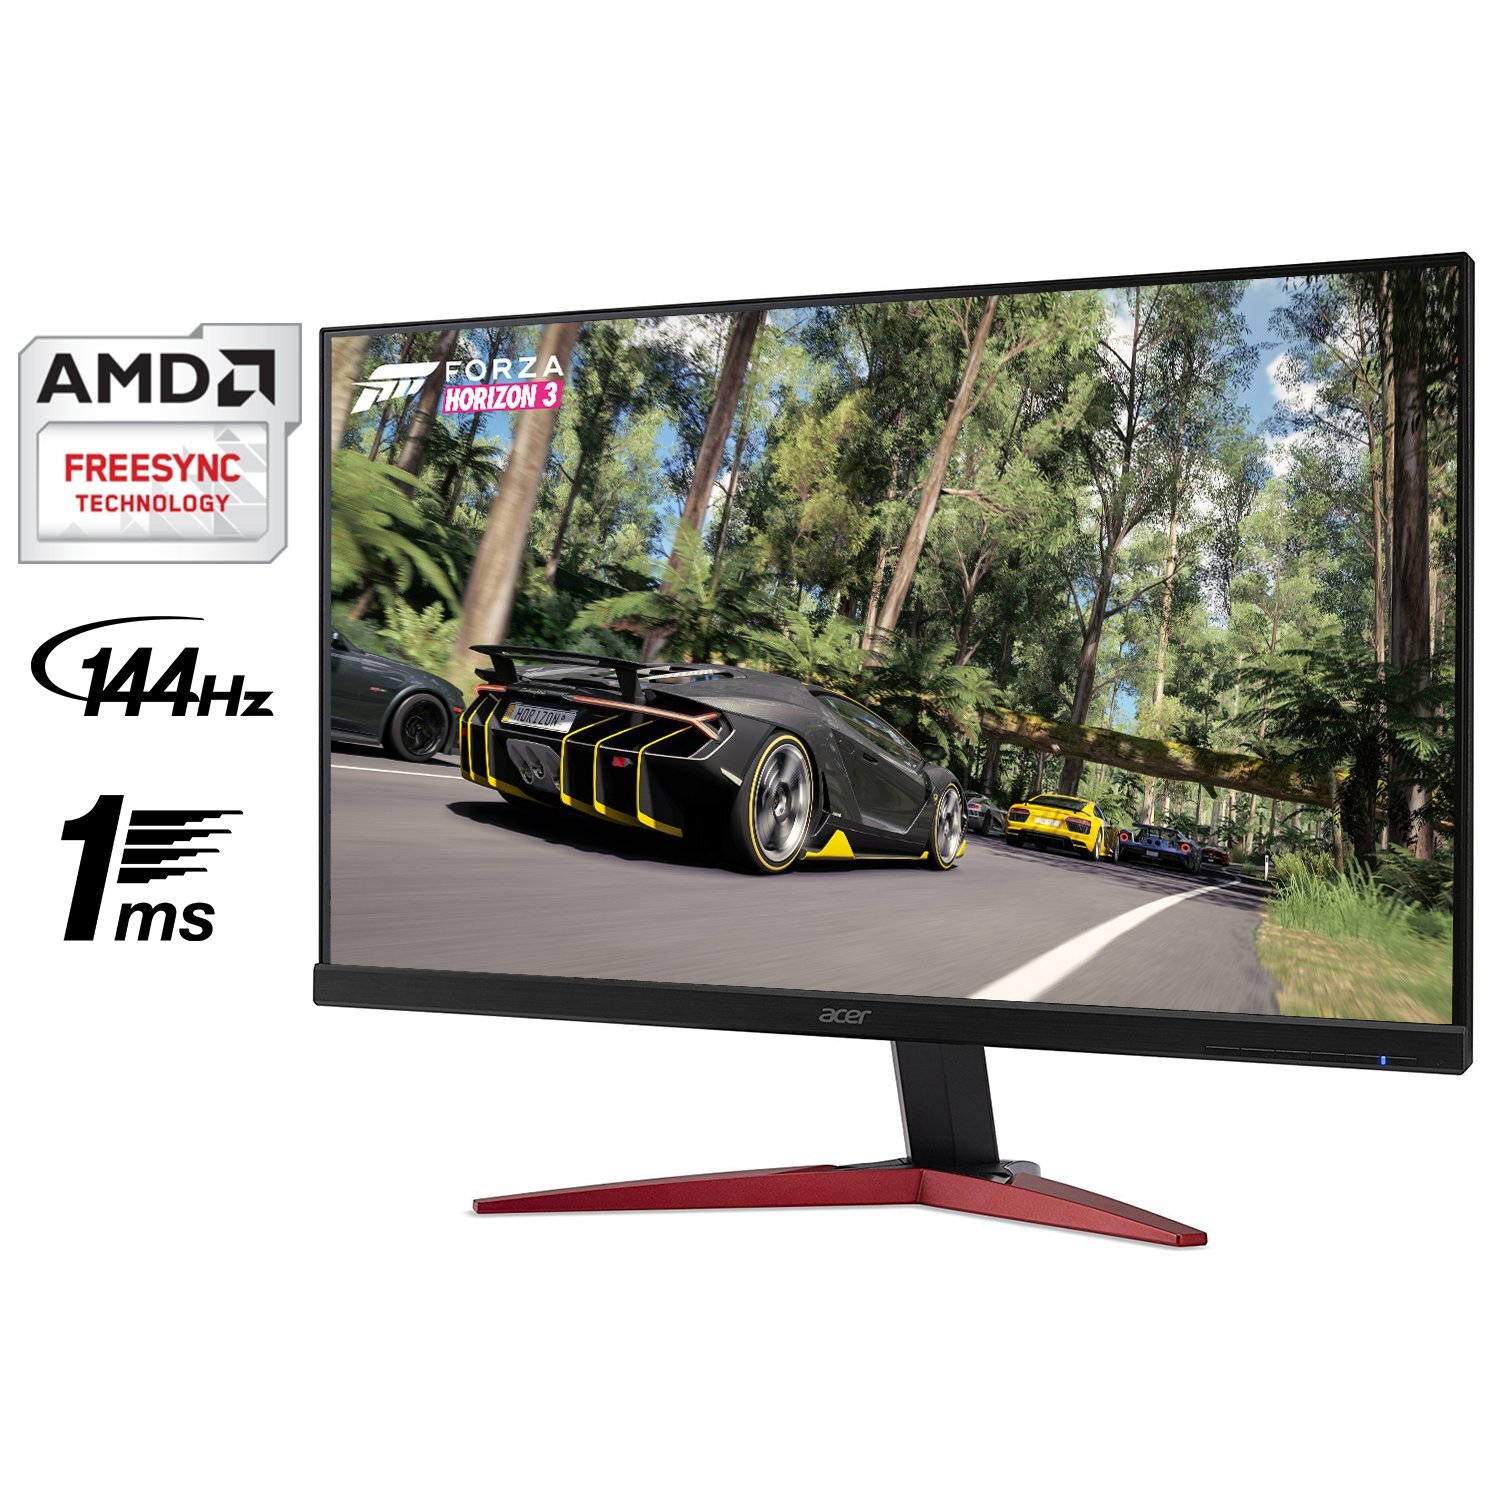 Acer KG271 Cbmidpx 27" Full HD (1920 x 1080) Monitor with AMD FREESYNC Technology (Display Port, HDMI & DVI Ports)